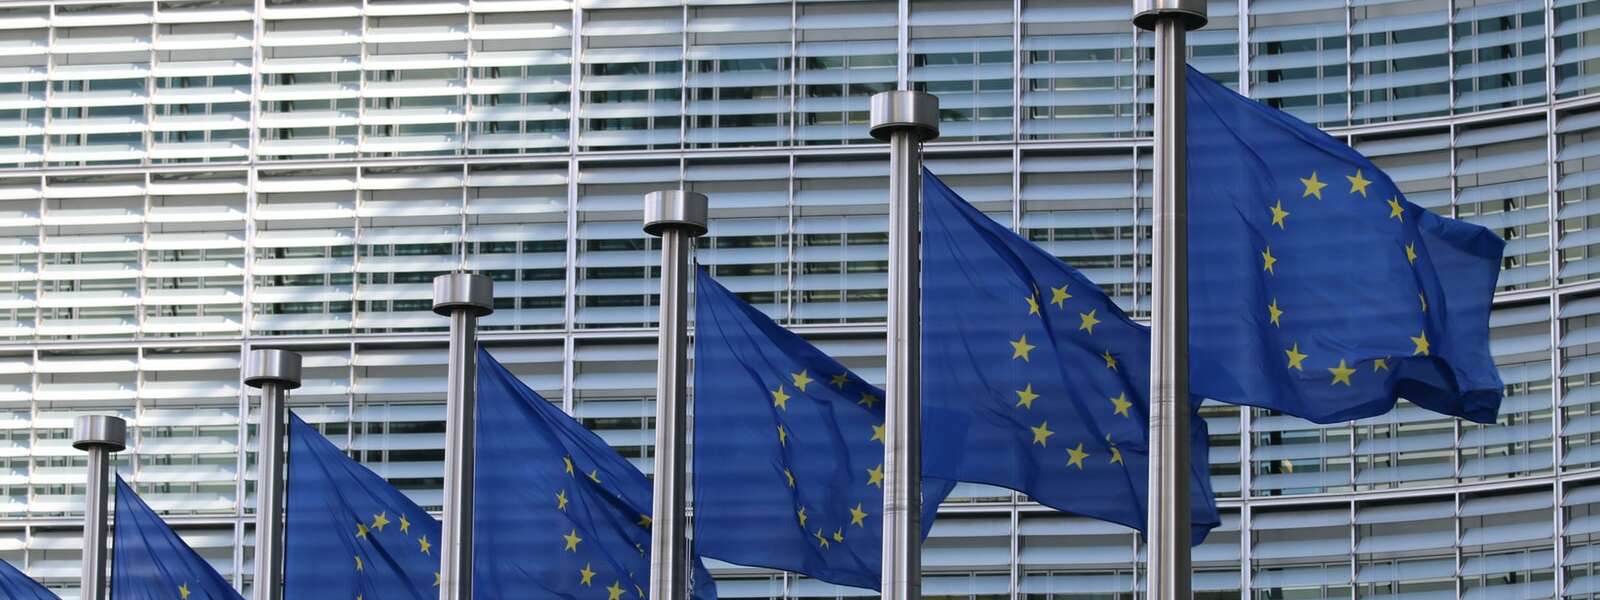 European Union (EU) flags (blue with yellow stars in a circle in the centre) fly in front of an office building.